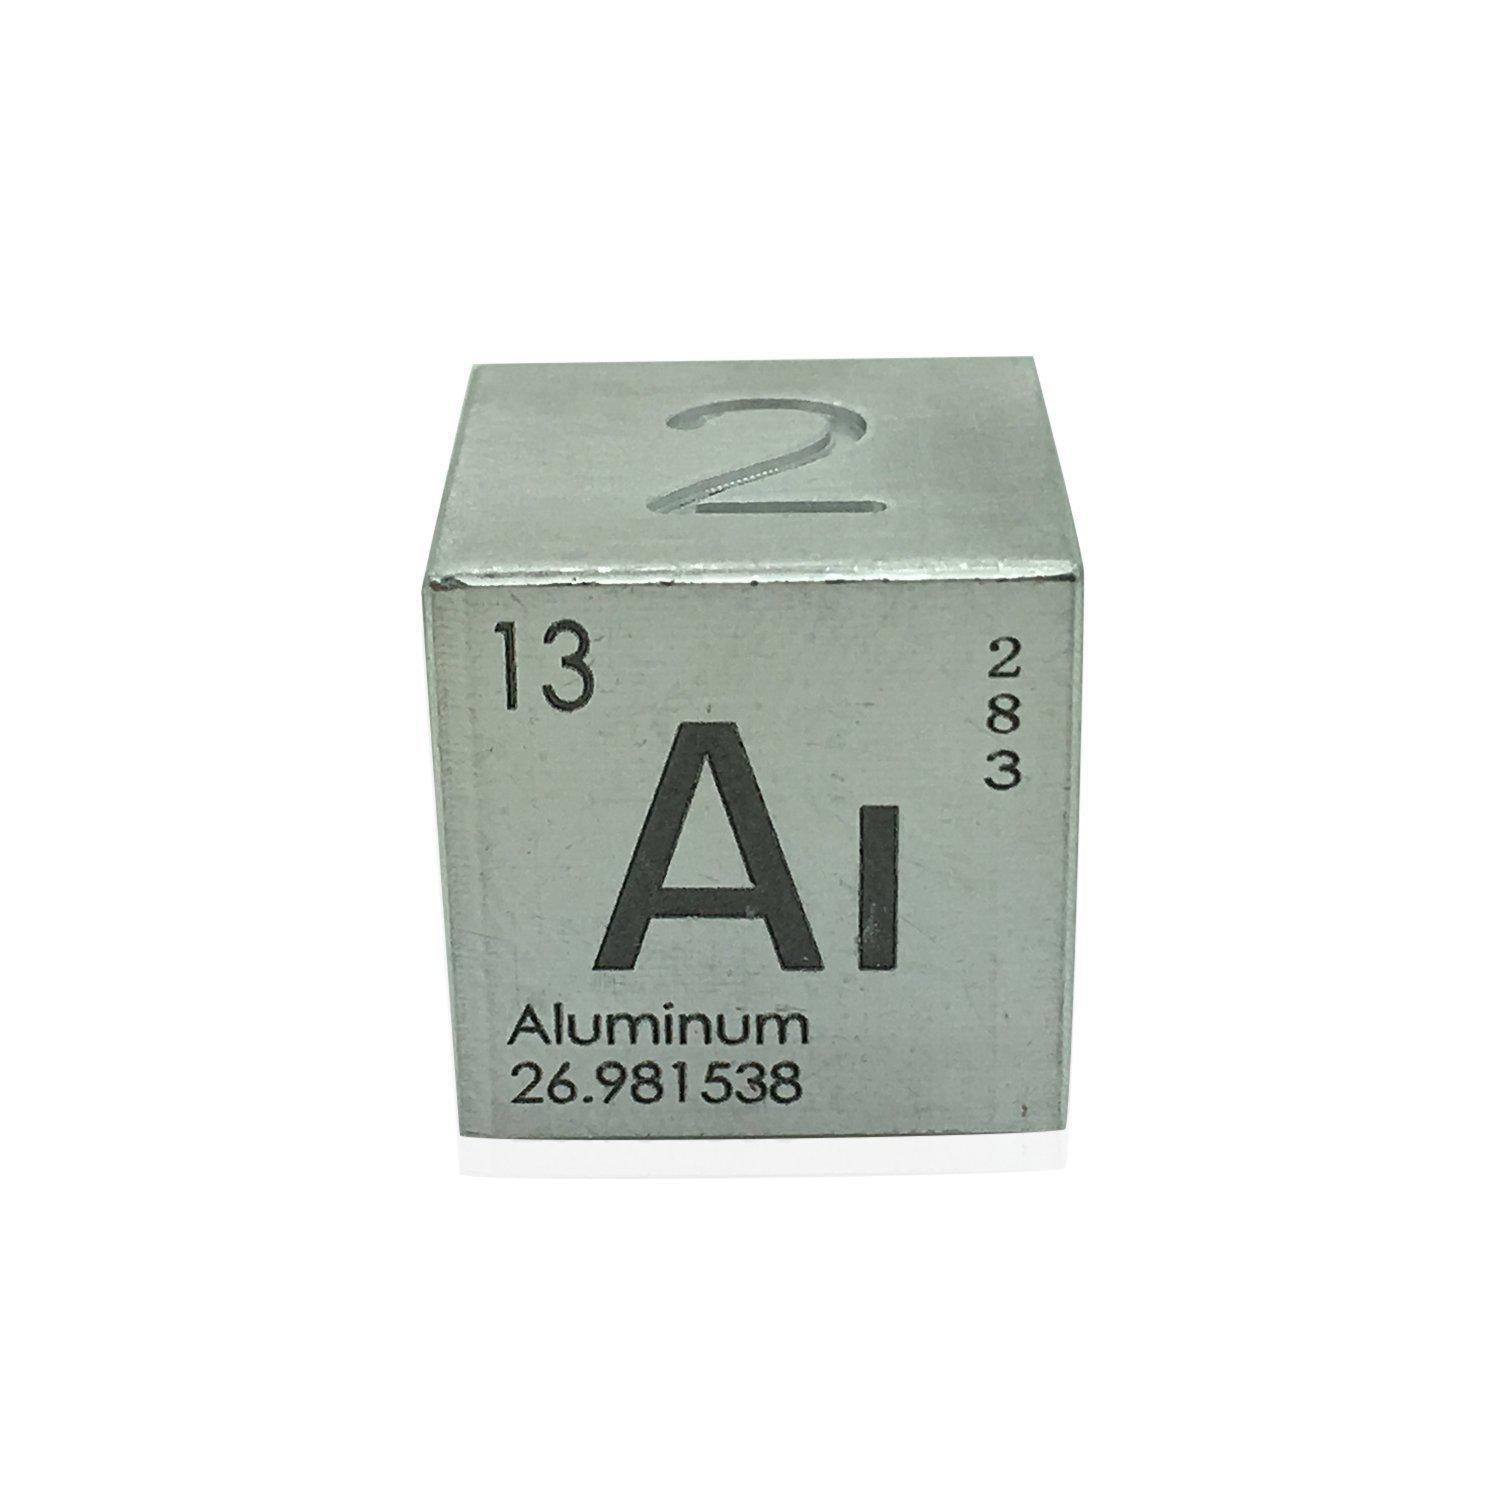 Single Alloy D6 in Aluminum by Norse Foundry-Dice-Norse Foundry-DND Dice-Polyhedral Dice-D20-Metal Dice-Precision Dice-Luxury Dice-Dungeons and Dragons-D&D-